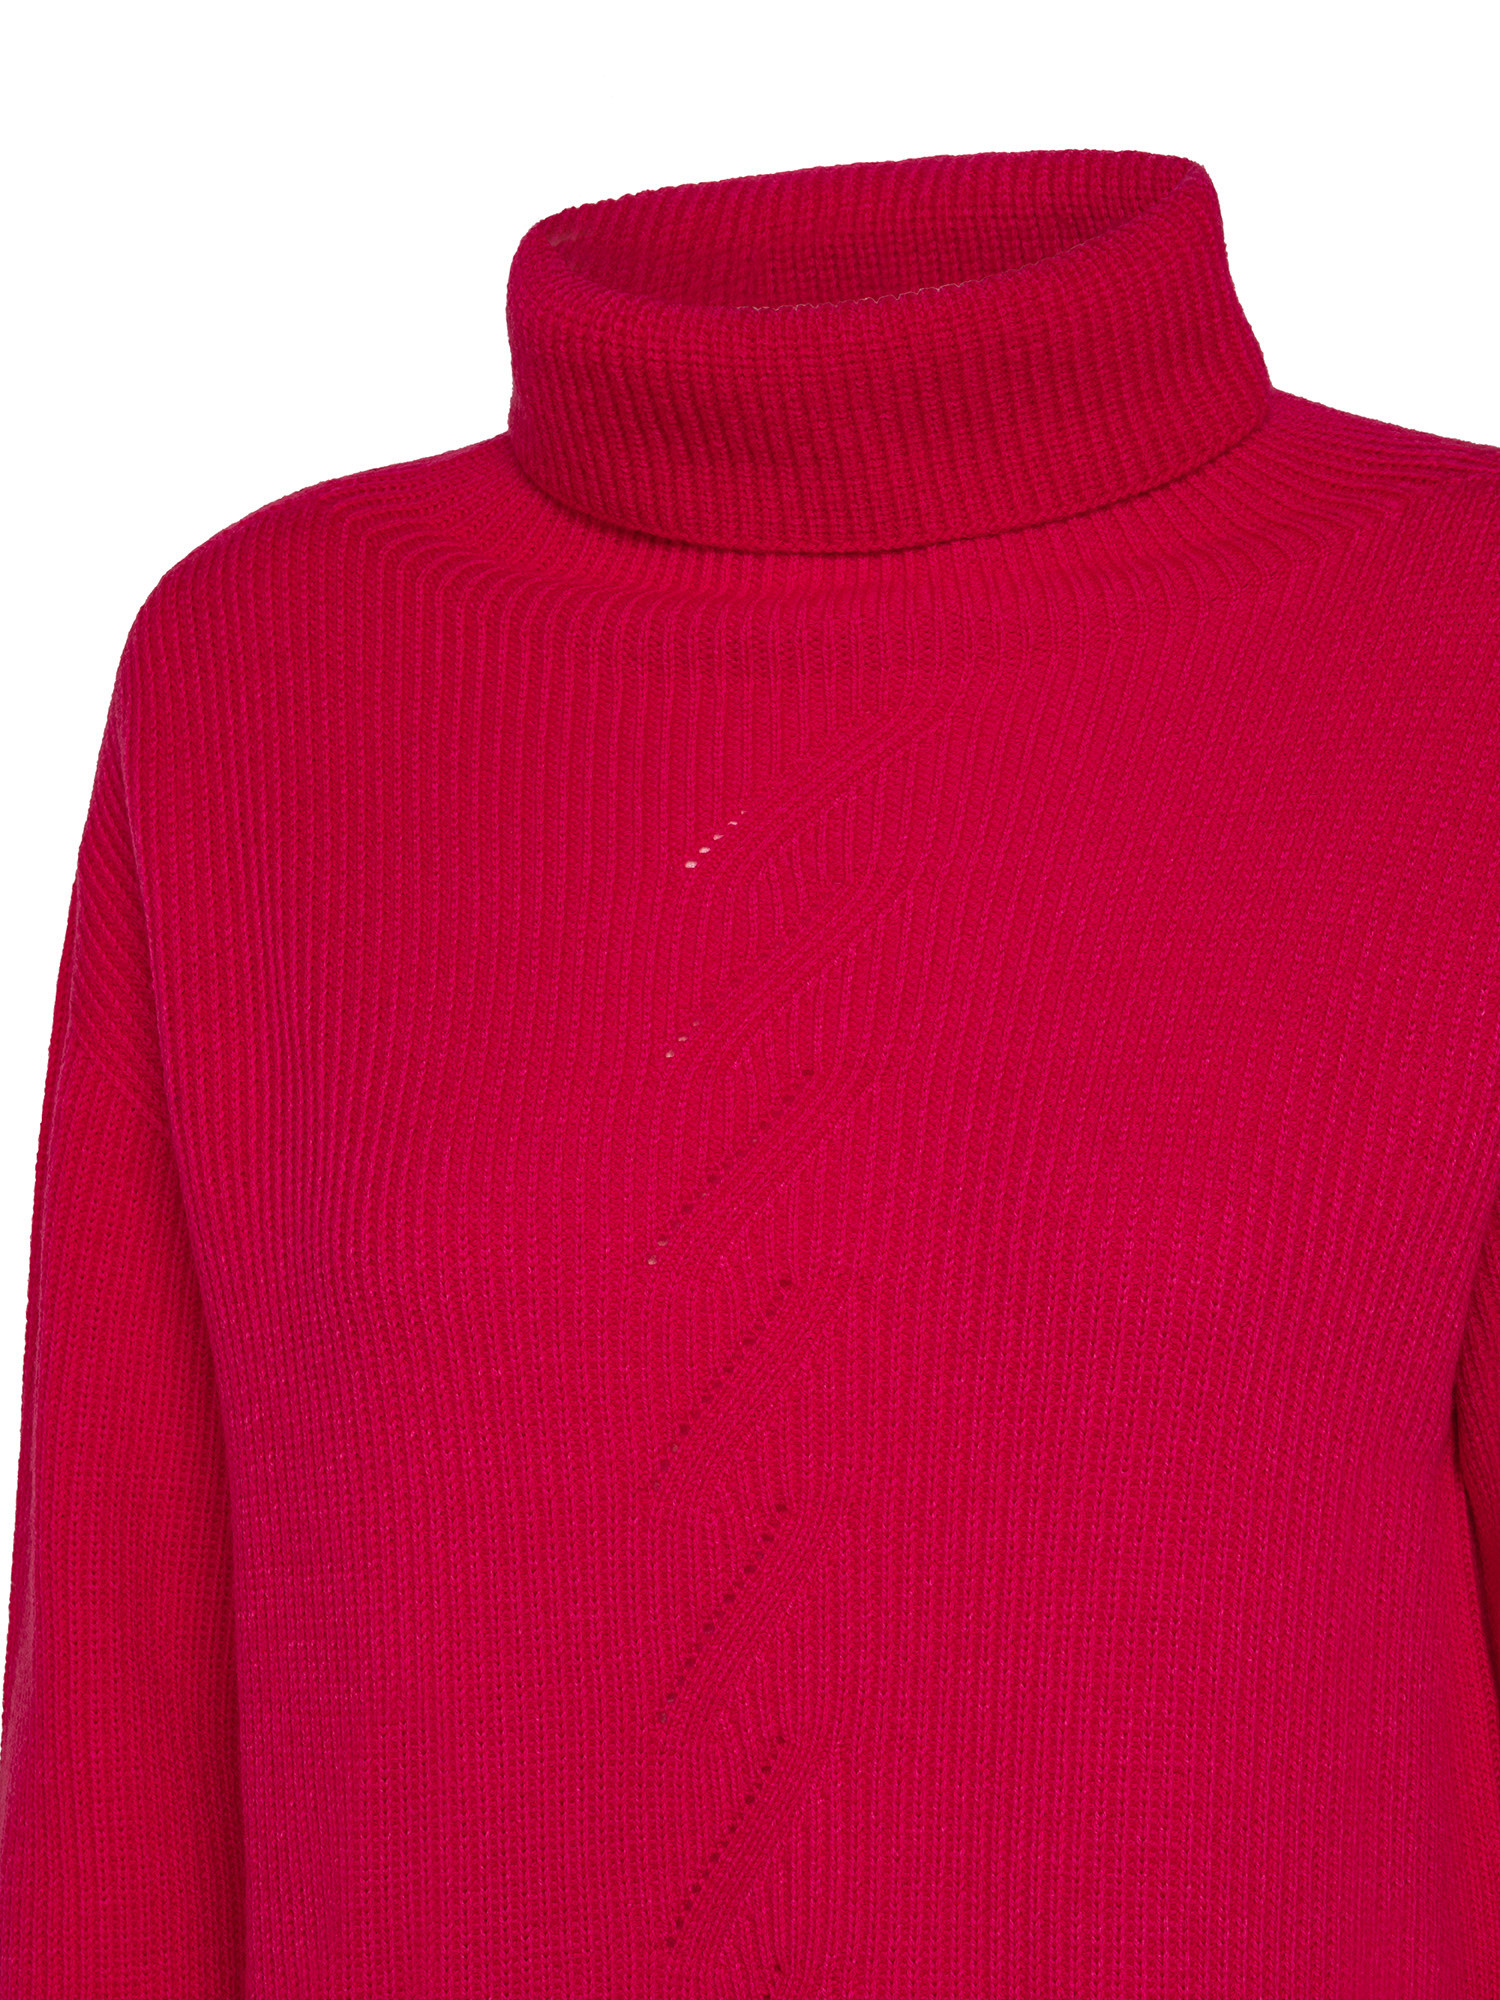 K Collection - Pullover dolcevita in lana extrafine, Rosa fuxia, large image number 2